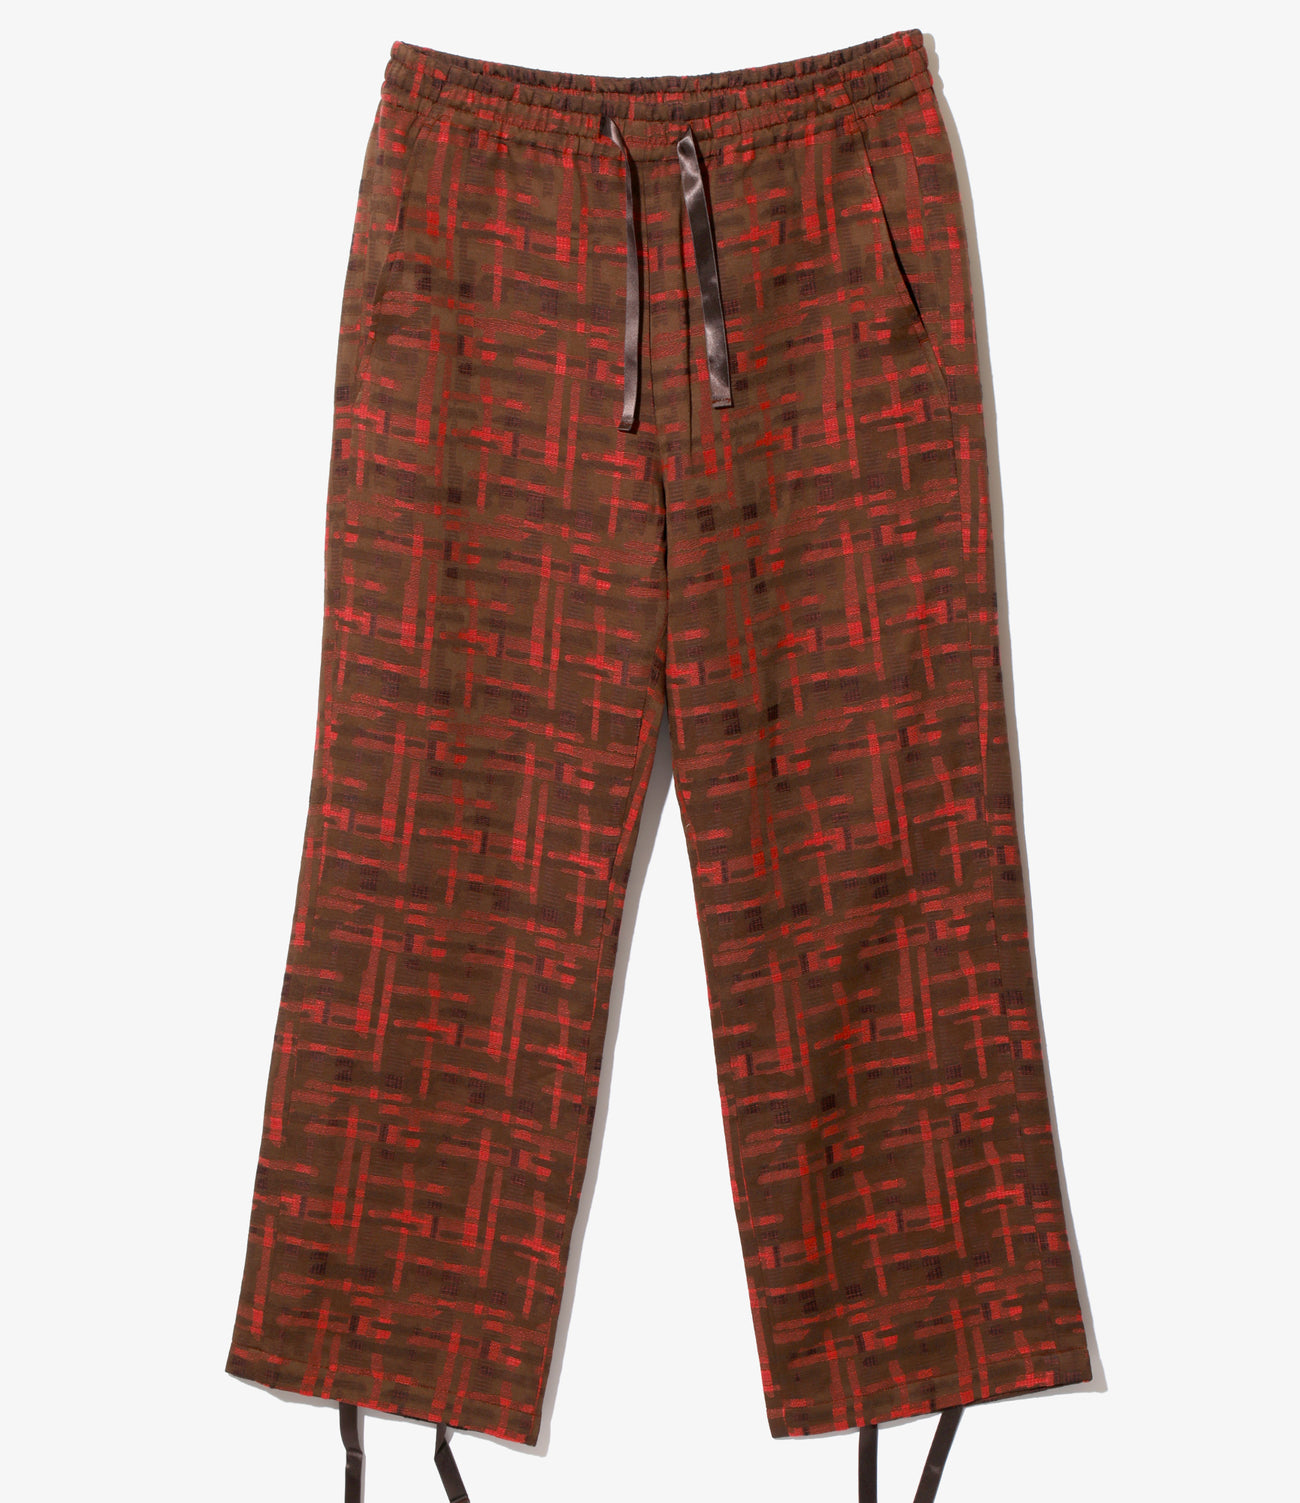 Needles STRING EASY PANT - ABSTRACT JQ.